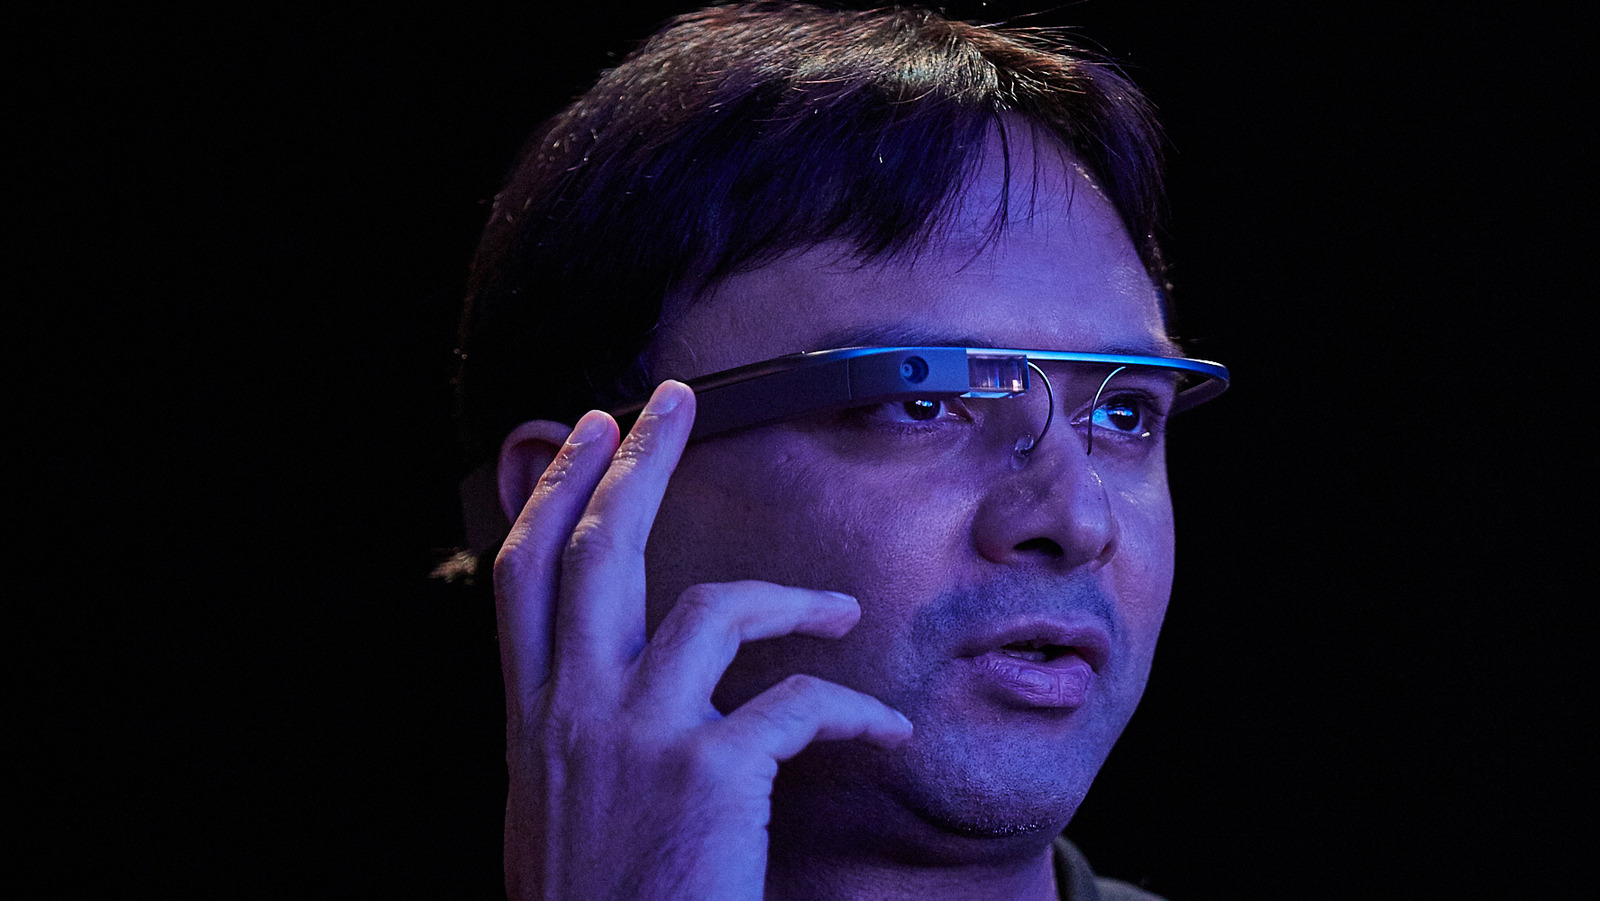 Google Discontinues Google Glass Enterprise The End to an Early AR Project